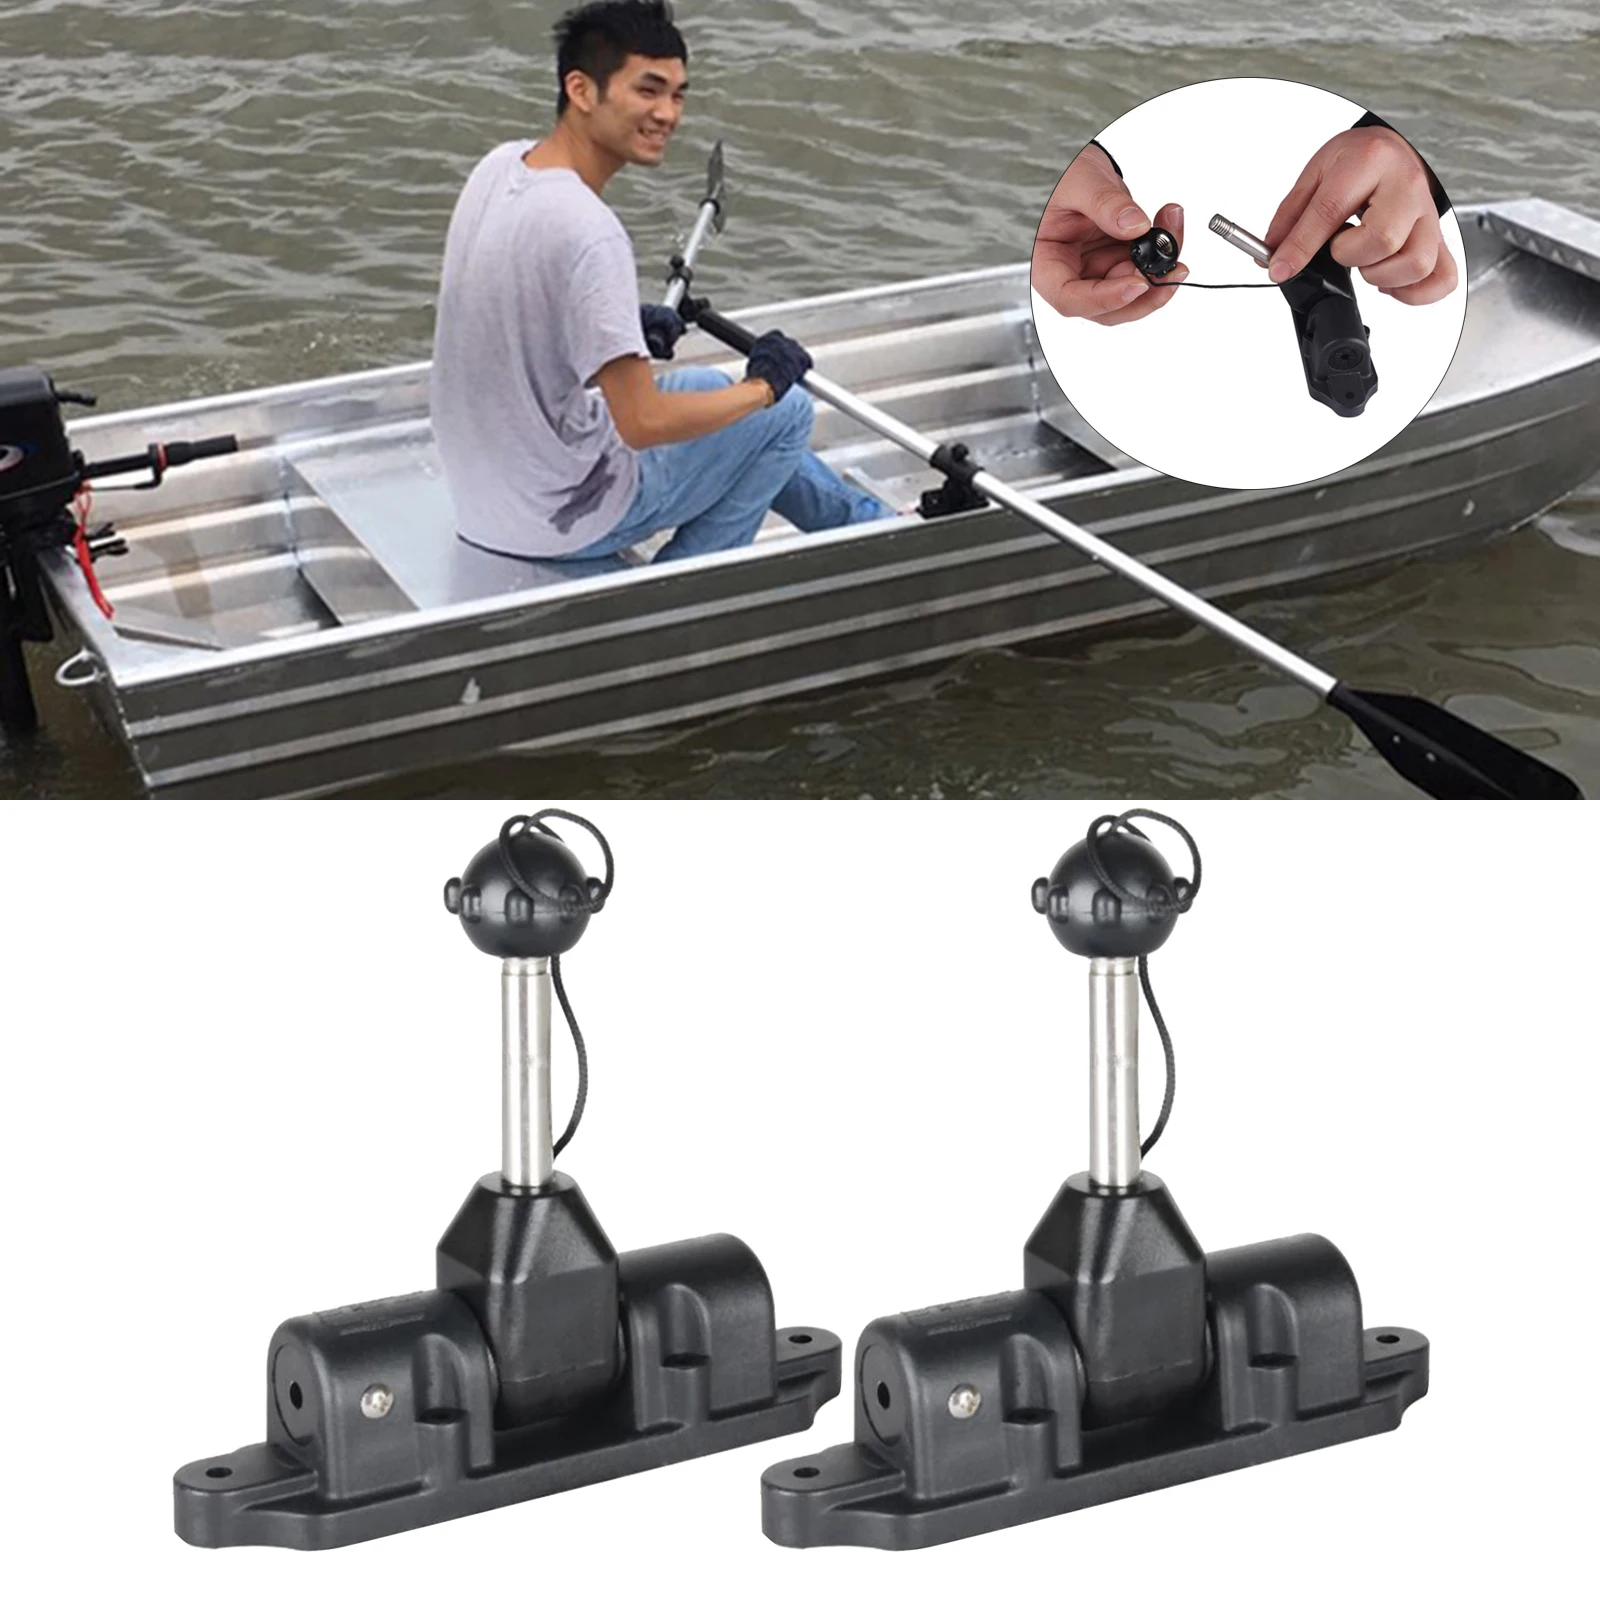 2x Universal Oar Holder Tie Down Paddle Lock Support Inflatable Boat Raft Kayak Accessories